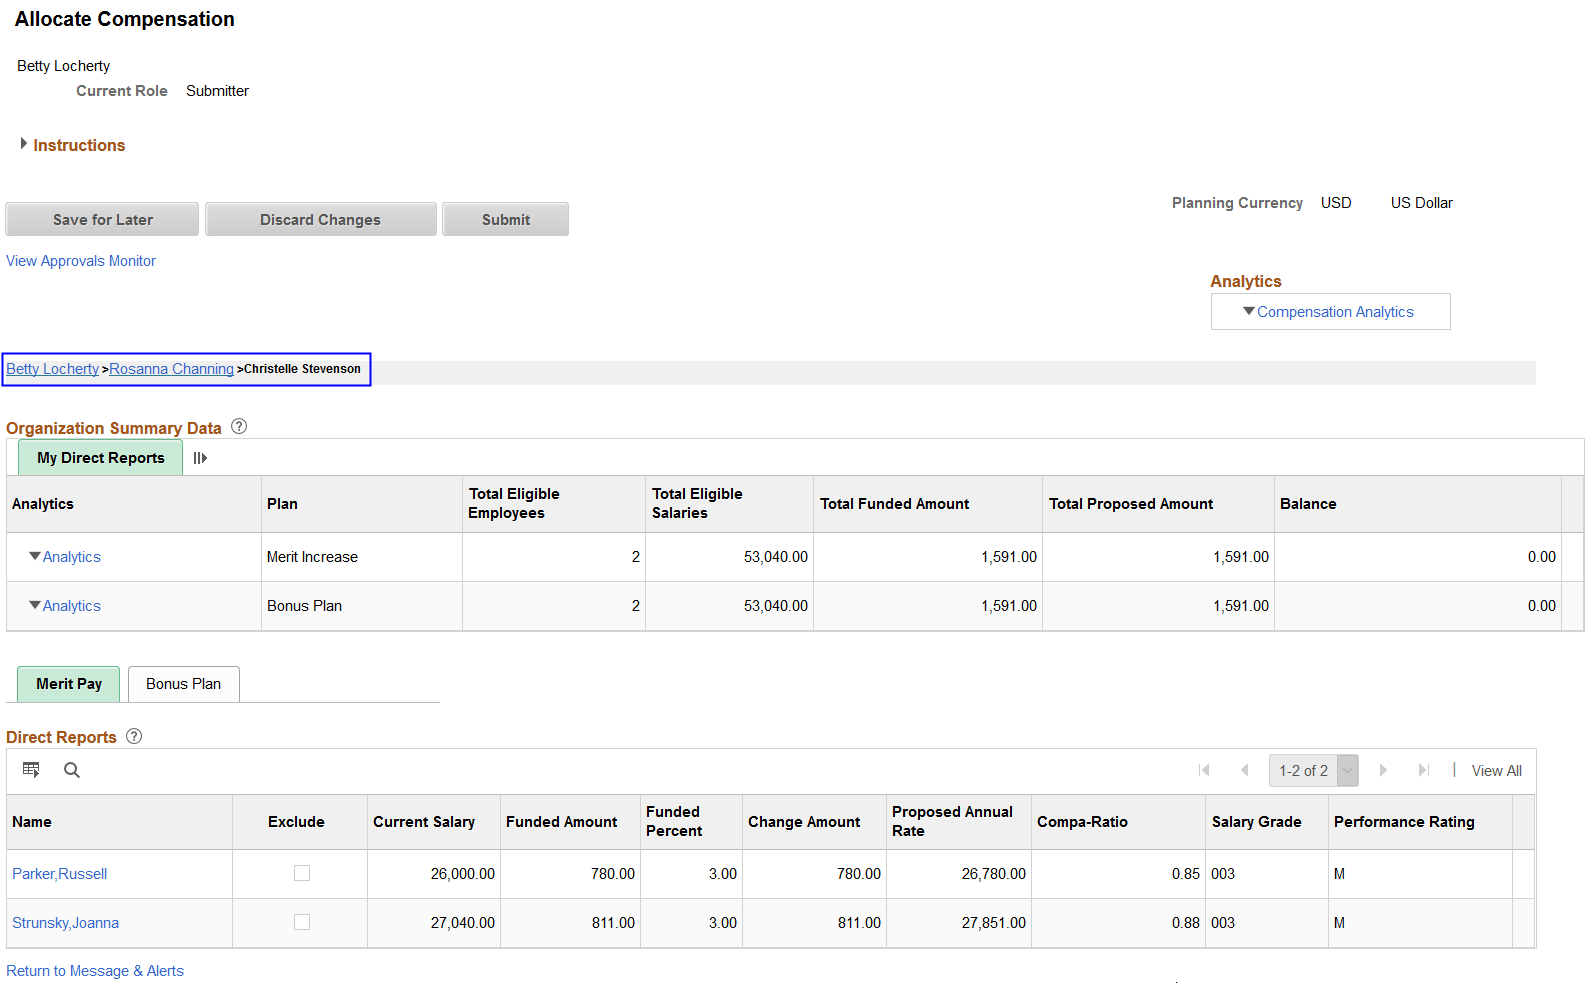 Viewing compensation proposals for indirect reports on the Allocate Compensation page